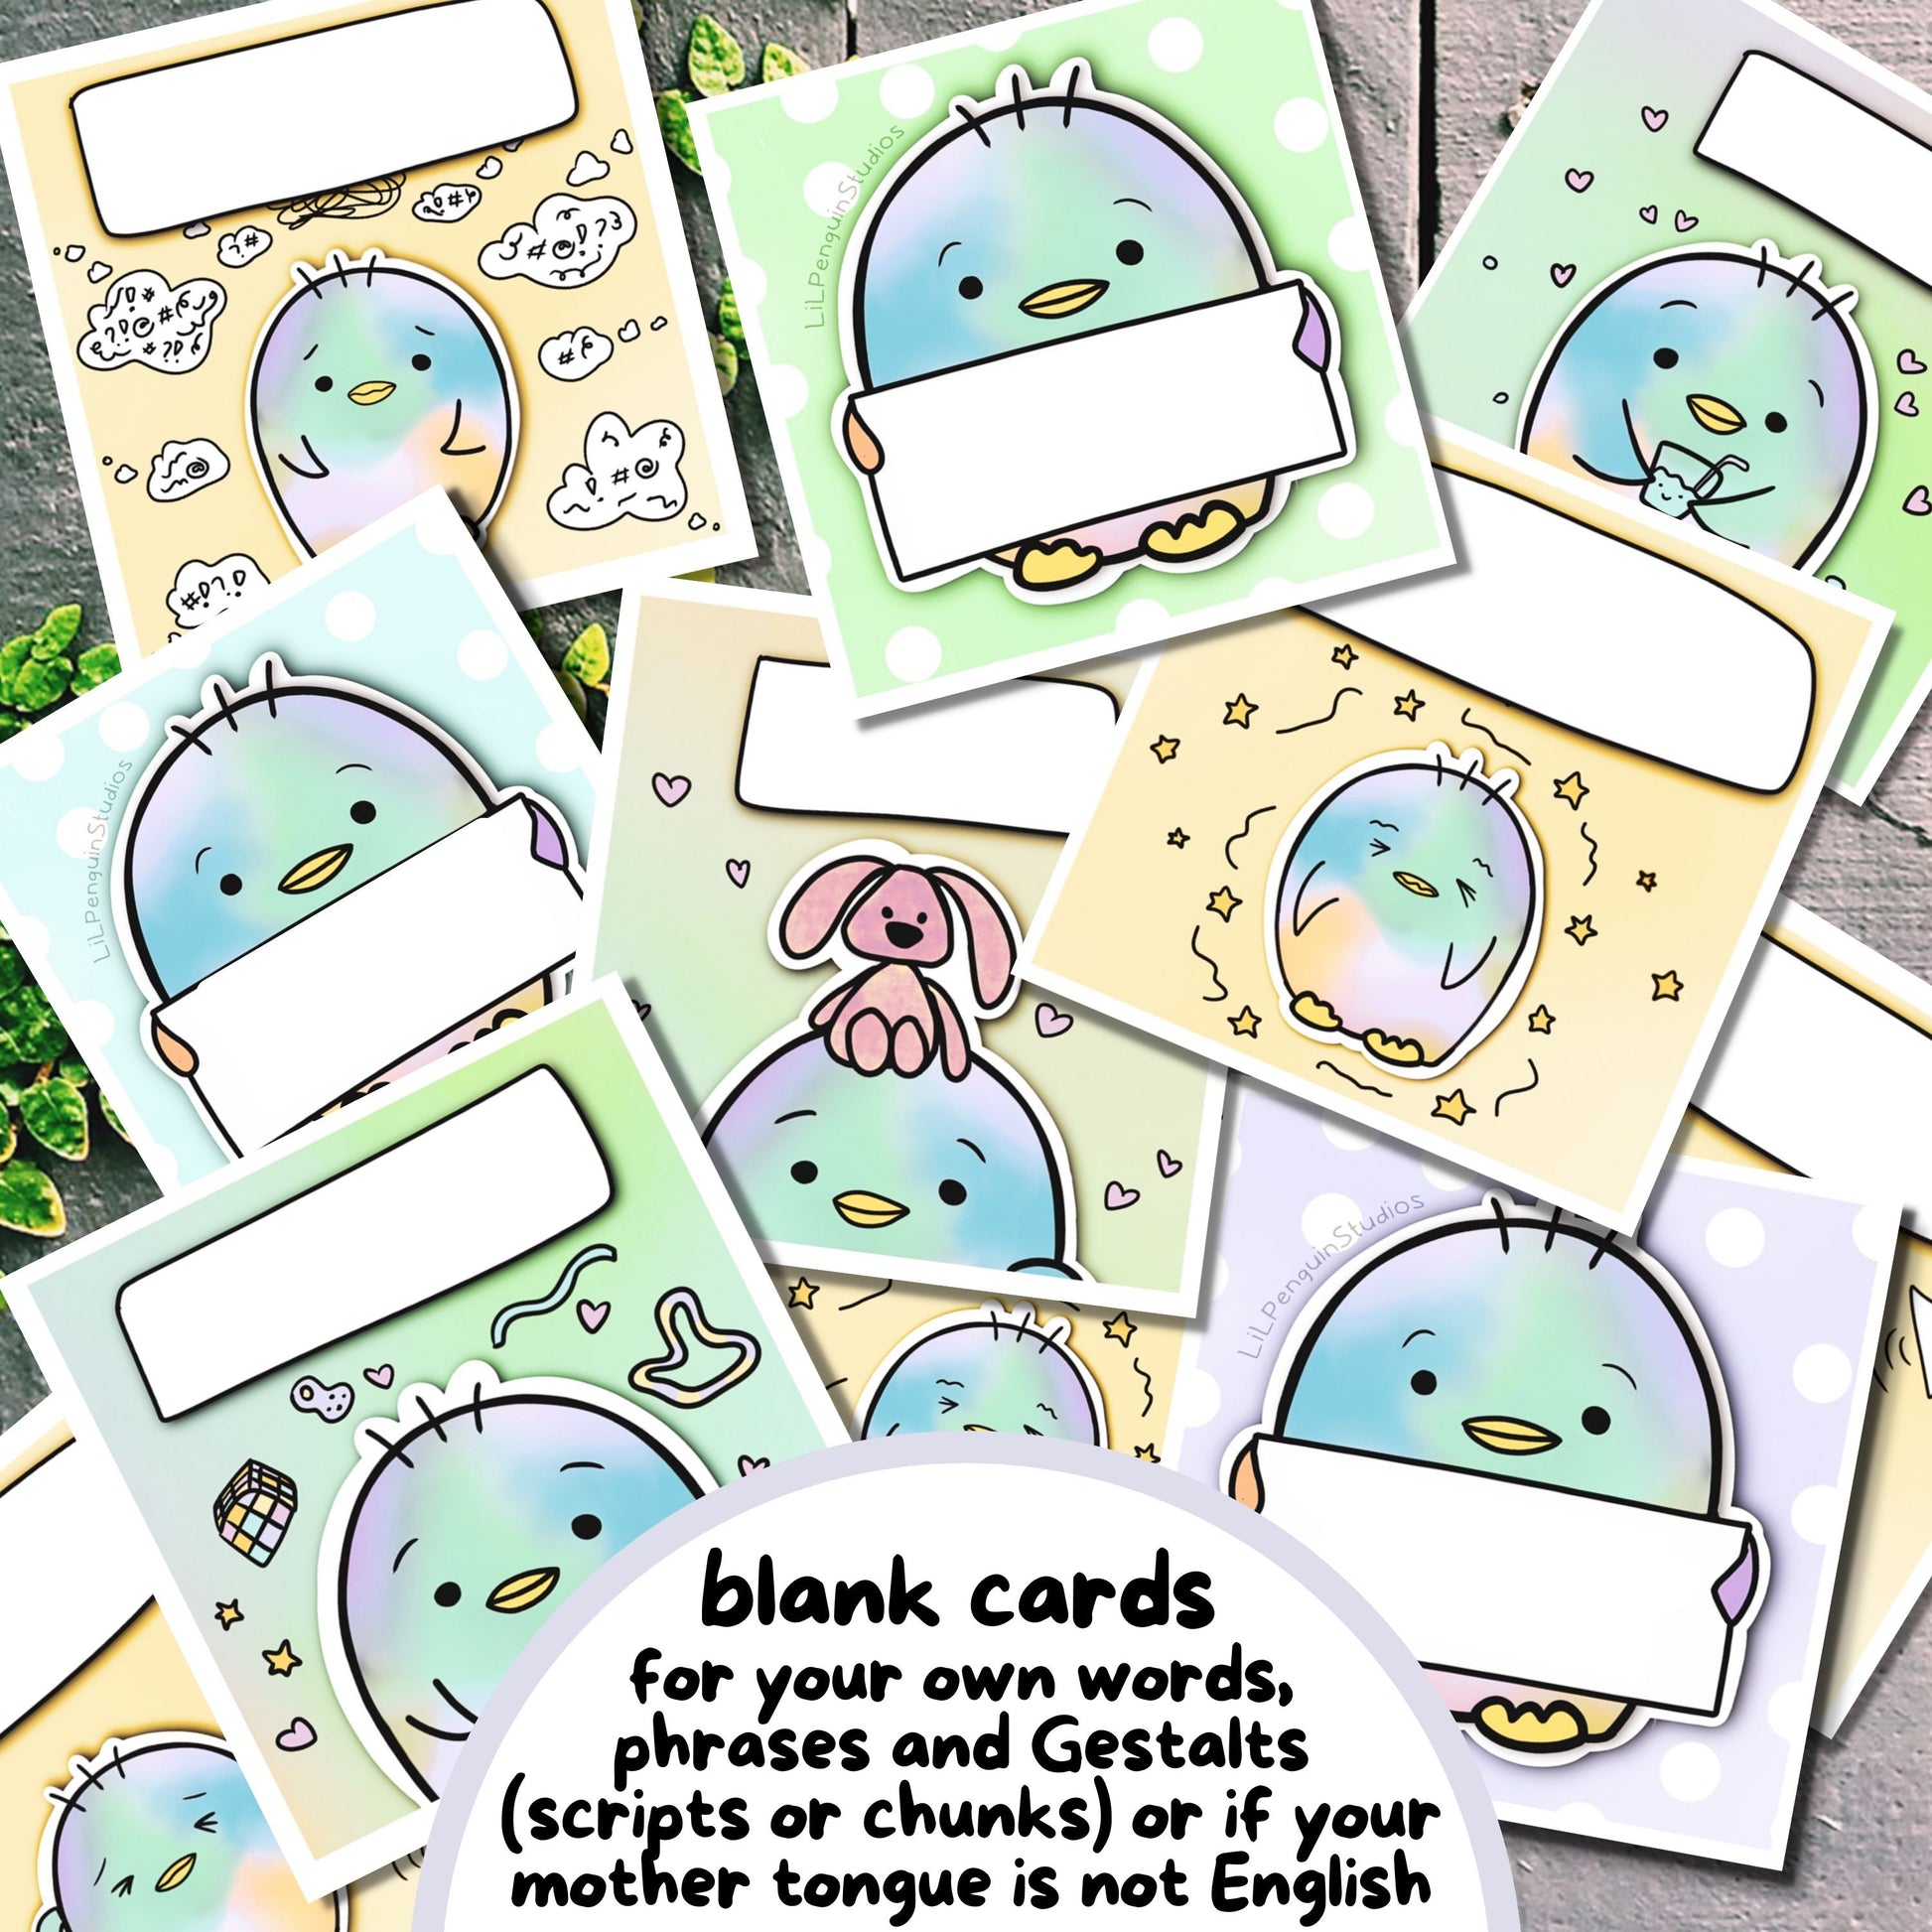 Blank Communication Cards that you can customize at home.  hand-drawn by an autistic artist (LiL Penguin Studios (autism_happy_plance on Instagram)